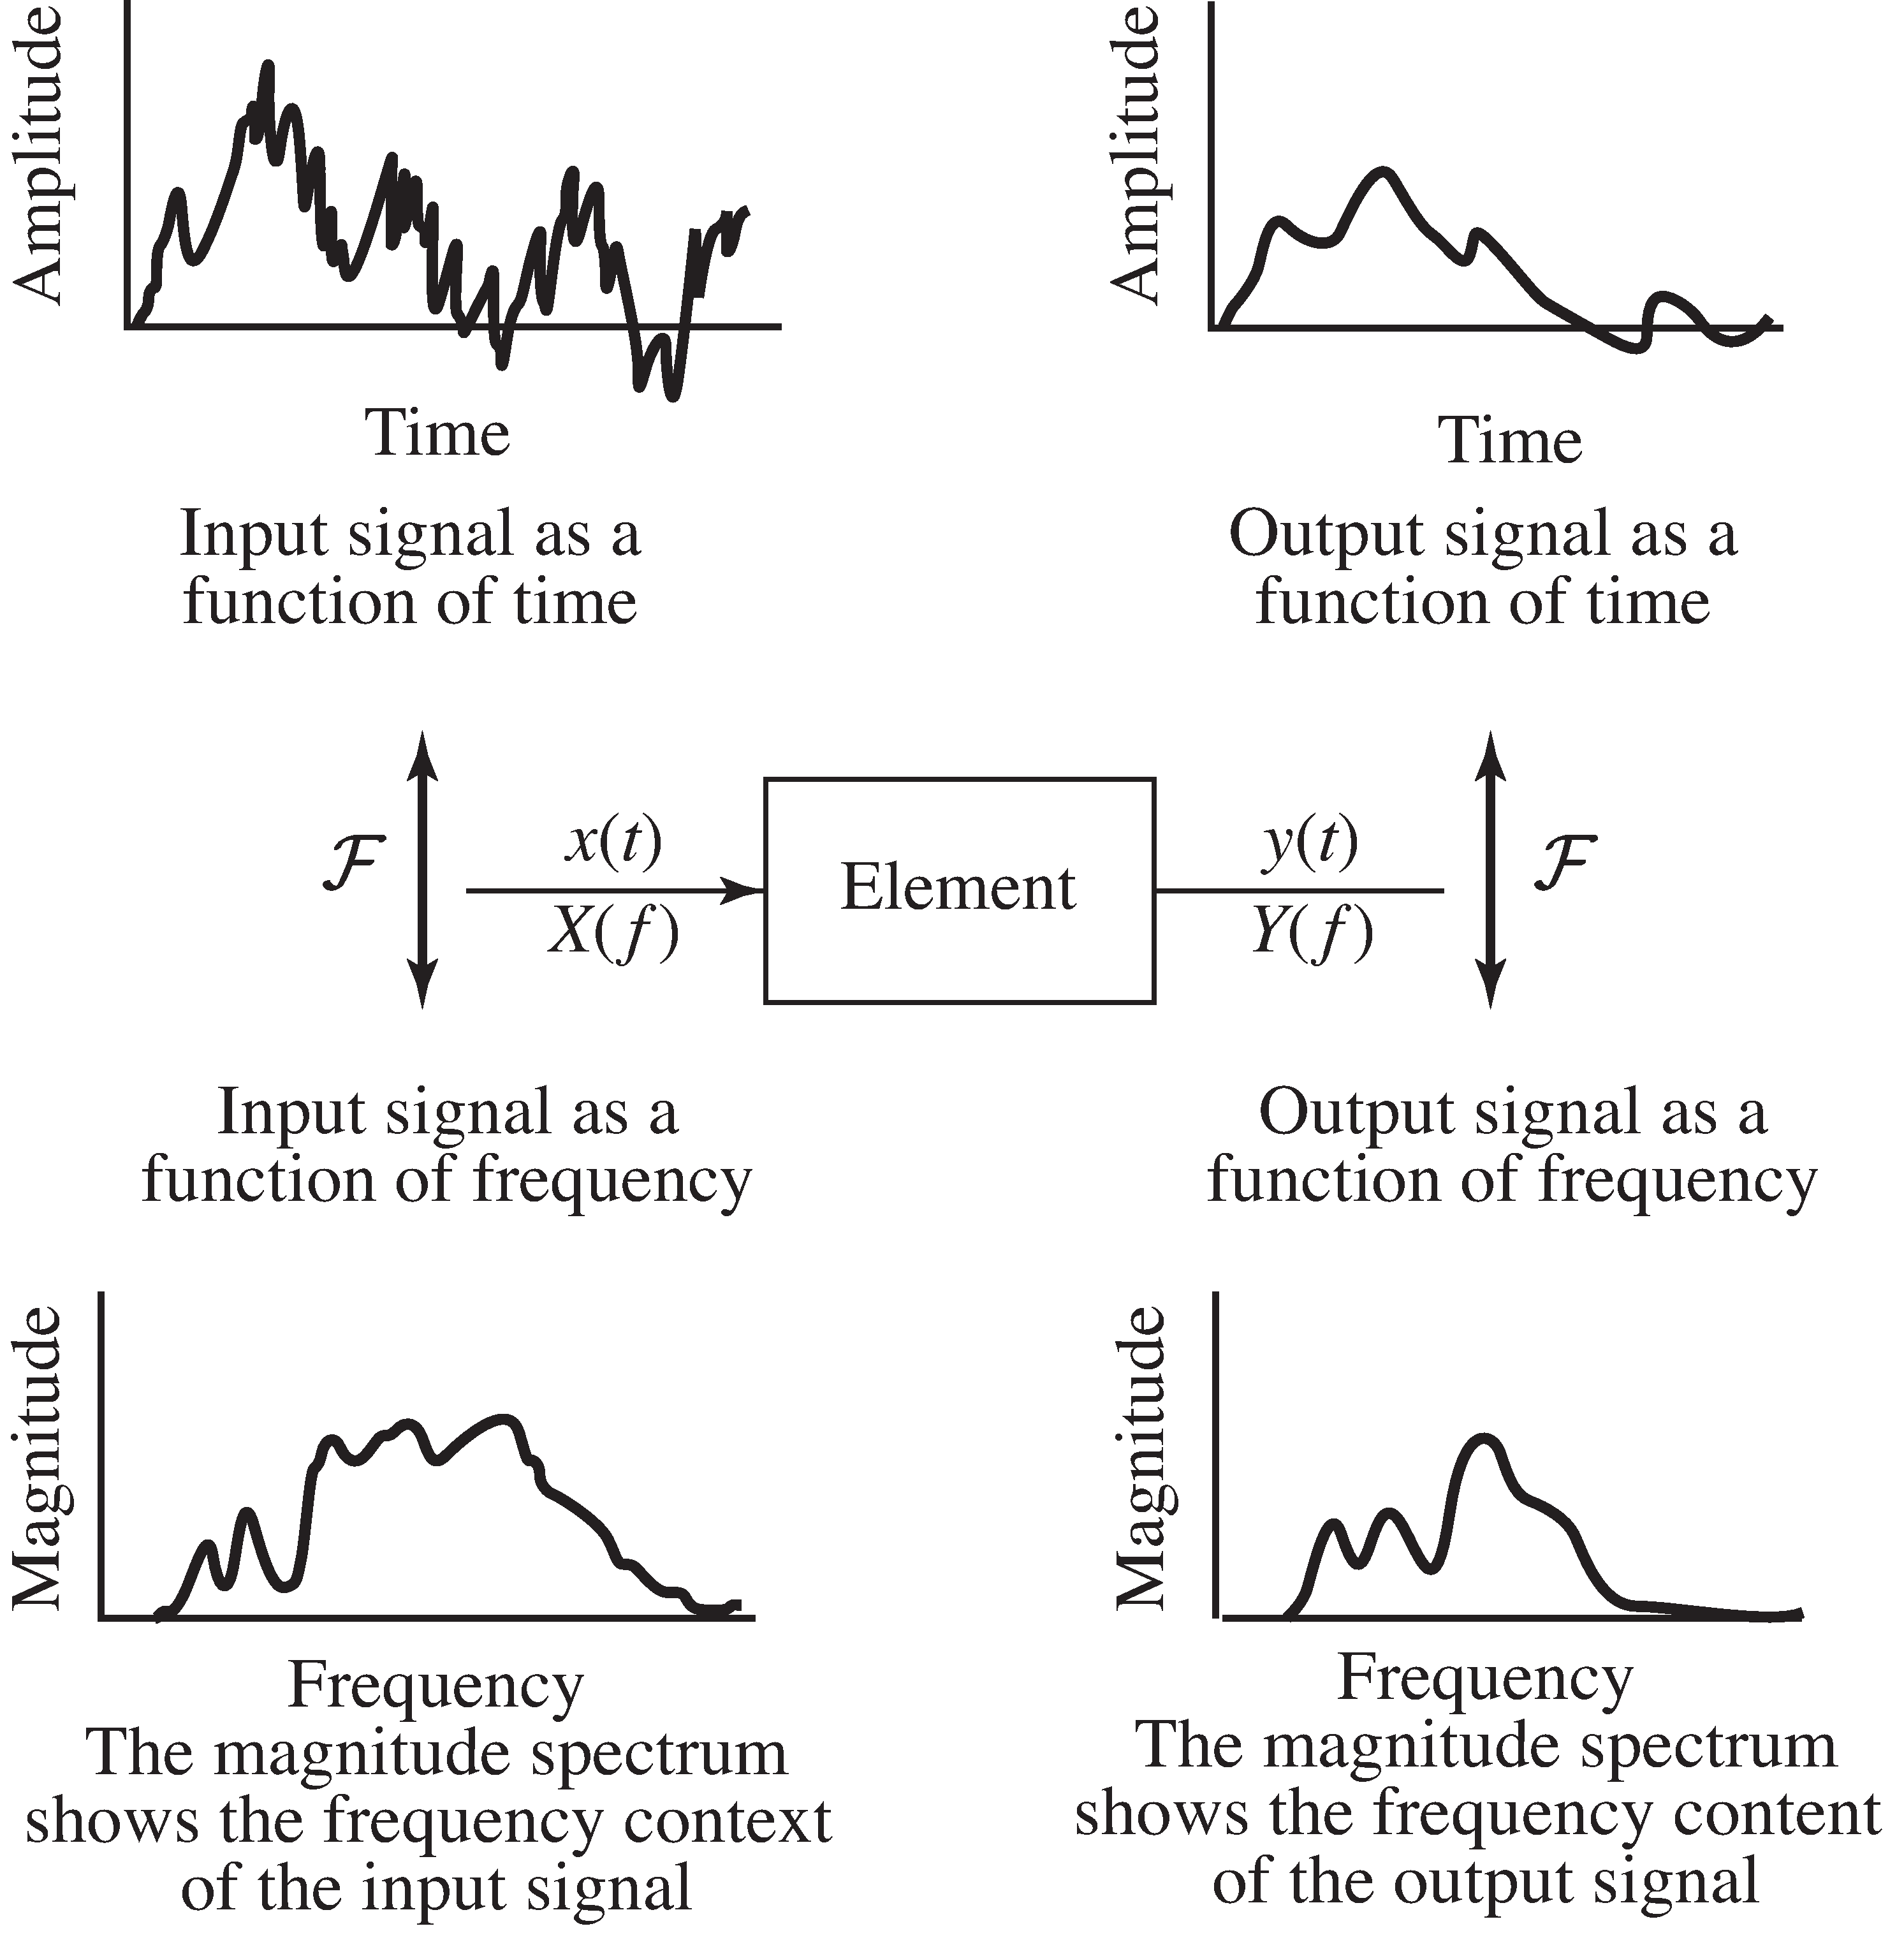 The element transforms the input signal x into the output signal y. The action of an element can be thought of in terms of its effect on the signals in time, or (via the Fourier transform) in terms of its effect on the spectra of the signals.